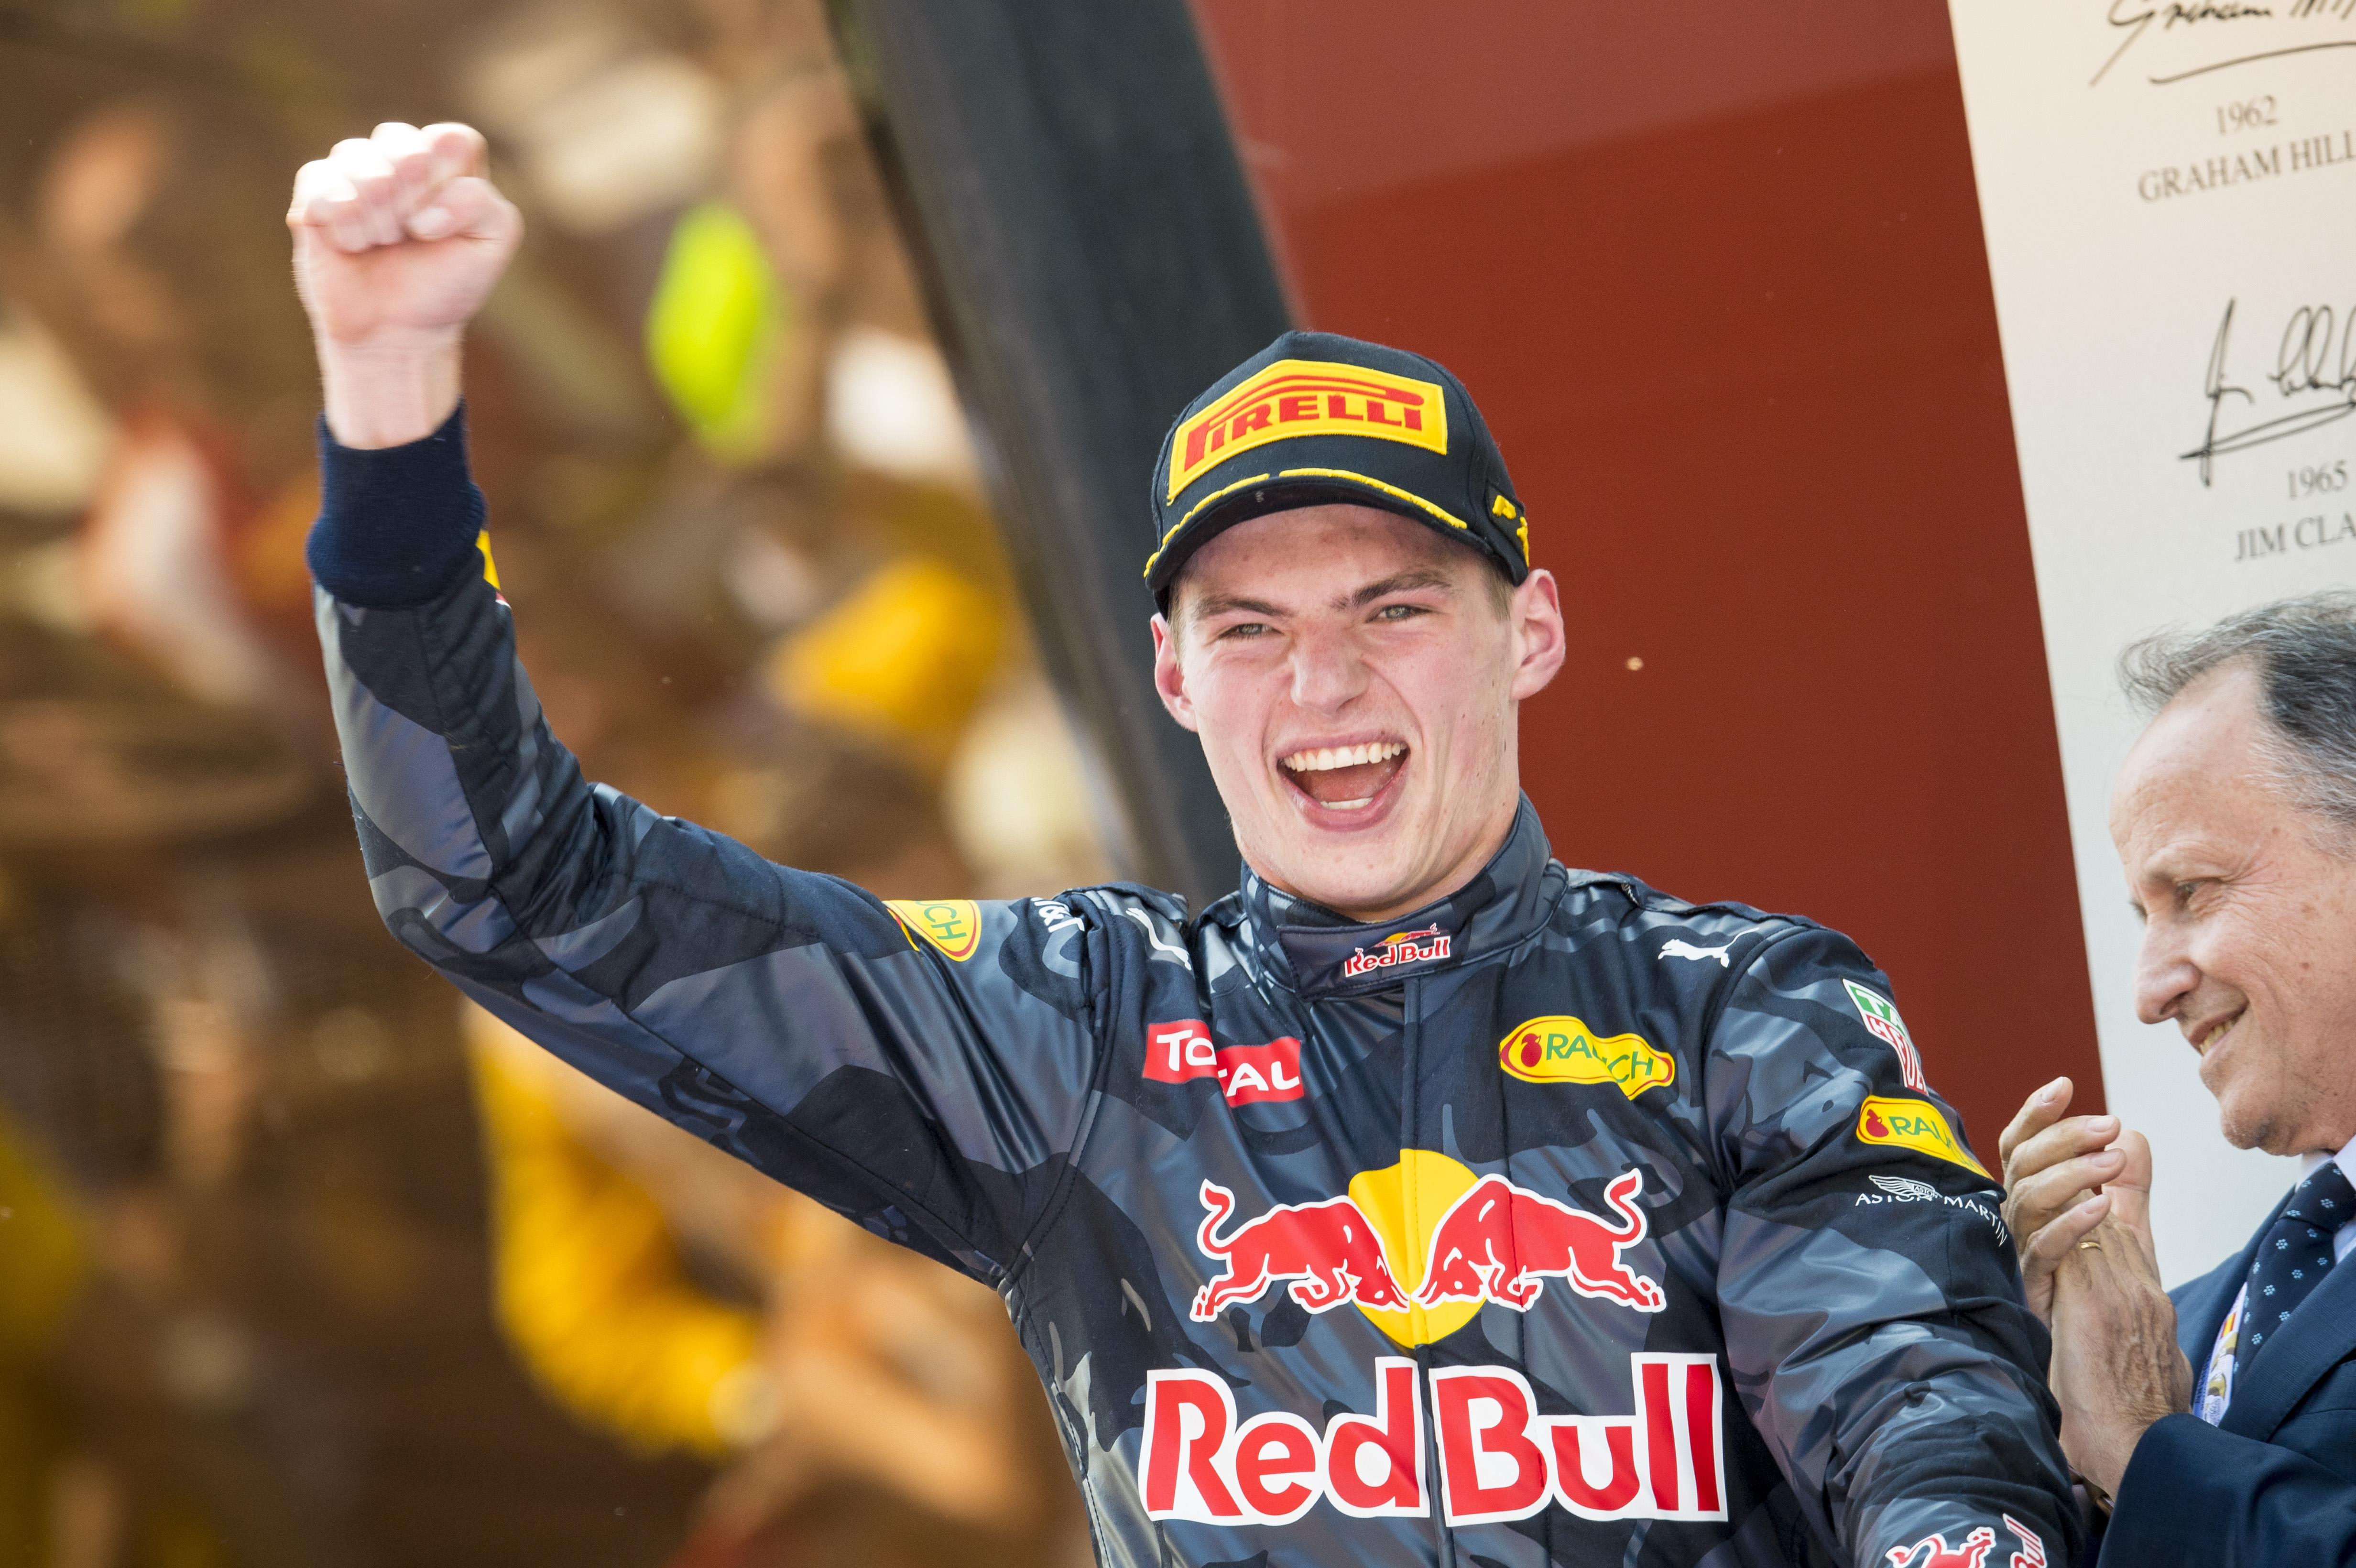 Photo of Verstappen becomes youngest to win an F1 race at 18 years; Hamilton, Rosberg crash out after Lap 1